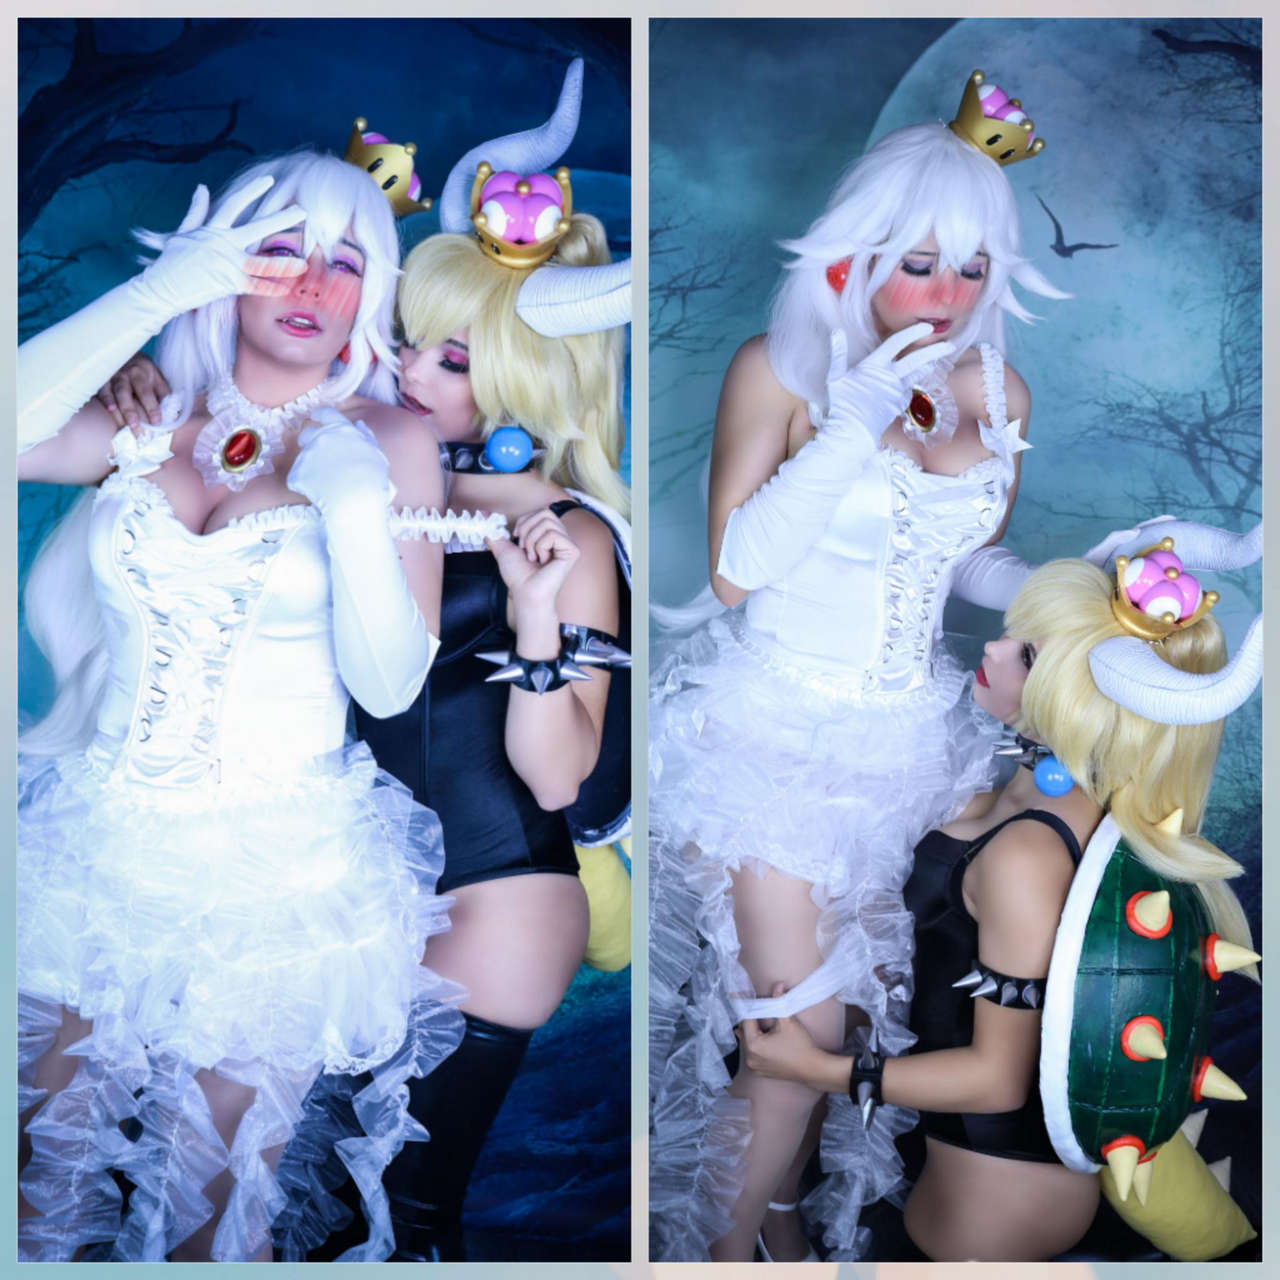 Who Needs Mario And Luigi When You Got Bowsette And Booette By Lysande And Gunarett